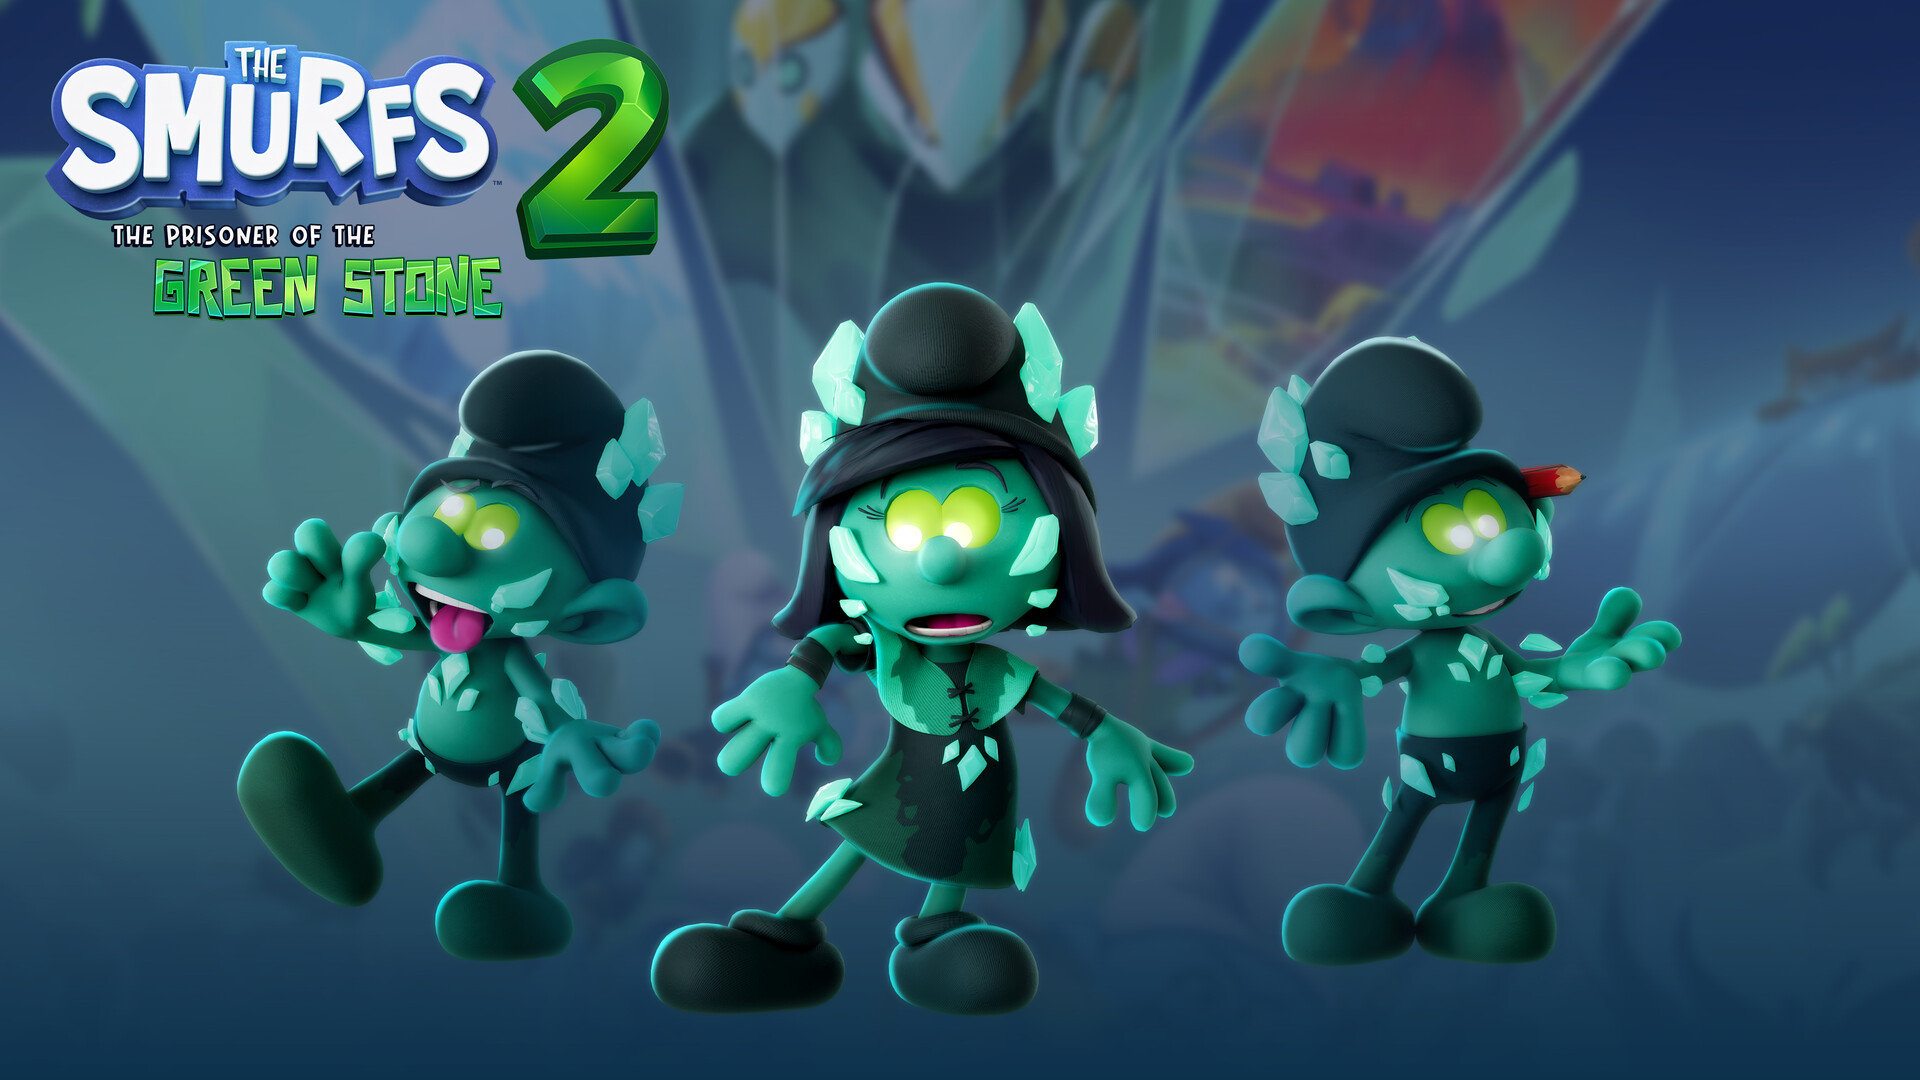 The Smurfs 2: The Prisoner of the Green Stone - Corrupted Outfit DLC GOG CD Key 1.3 $